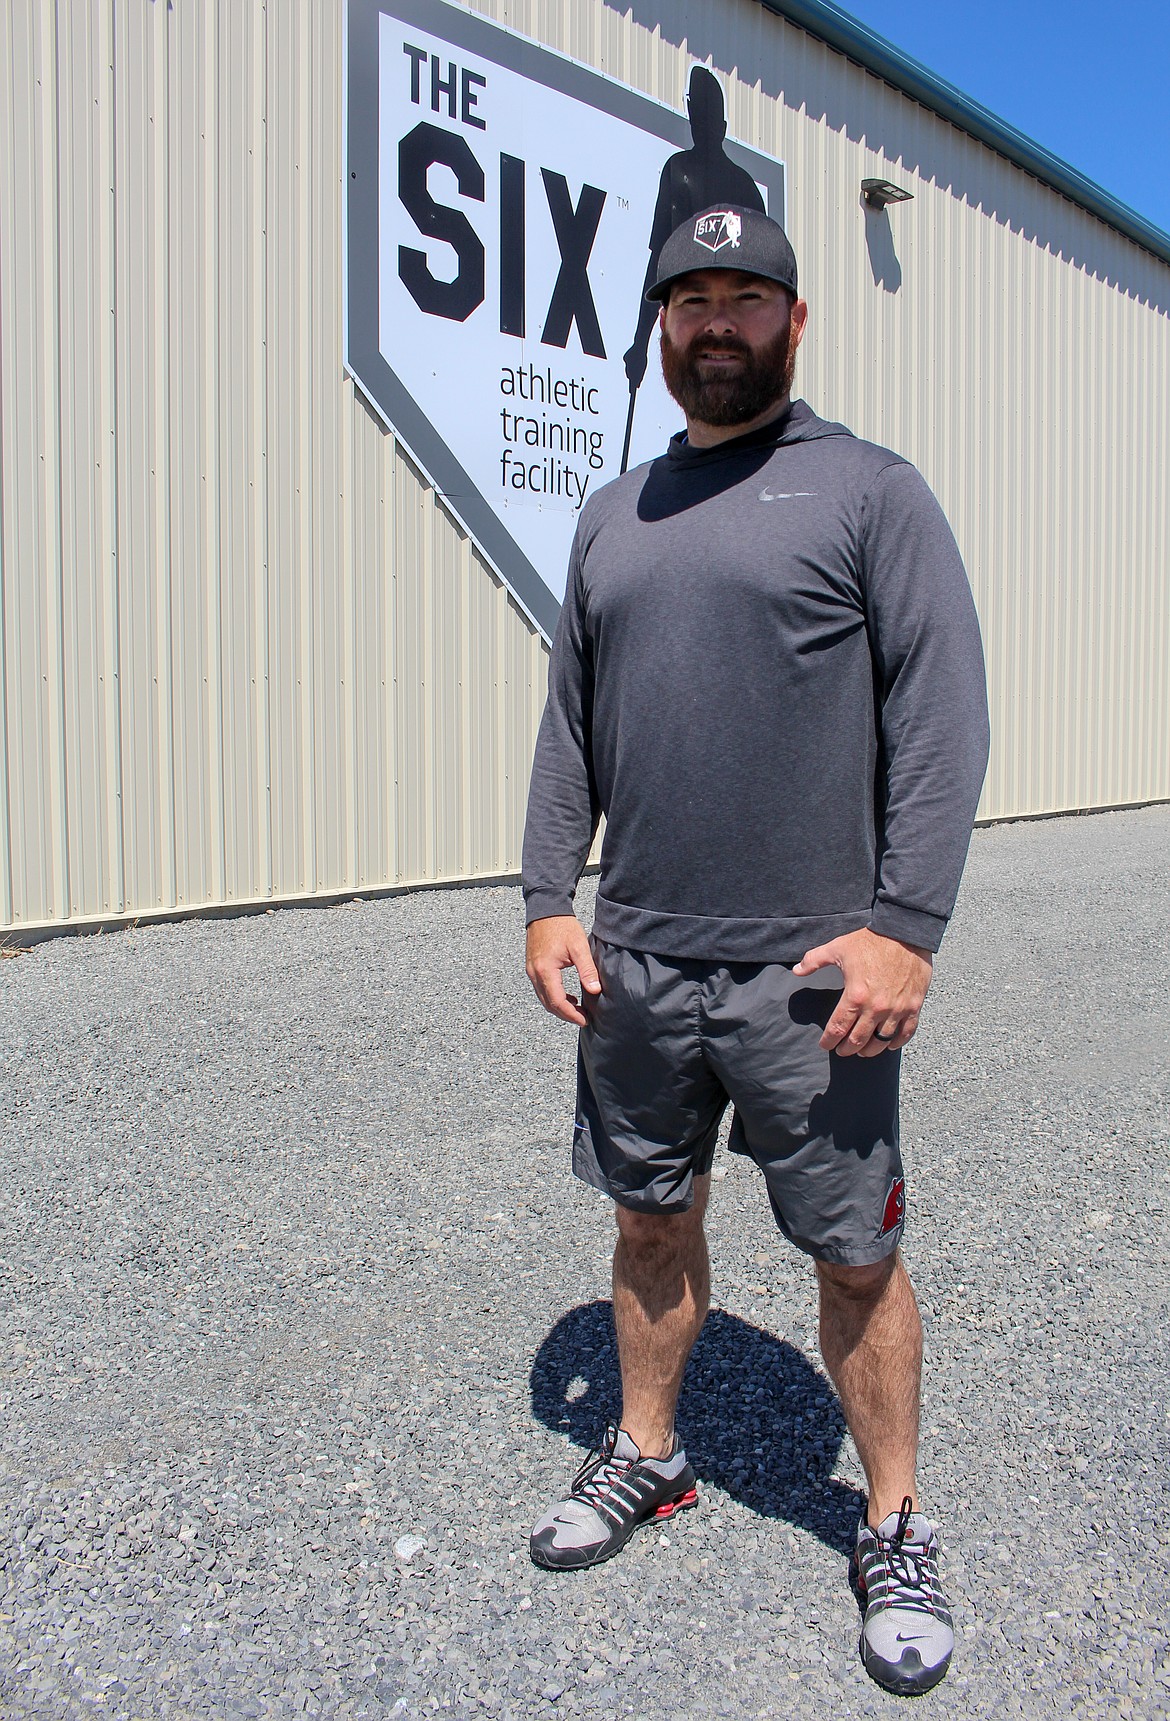 Ryan Doumit, owner of The Six Training Facility, stands outside the facility in Moses Lake on Friday, June 25.